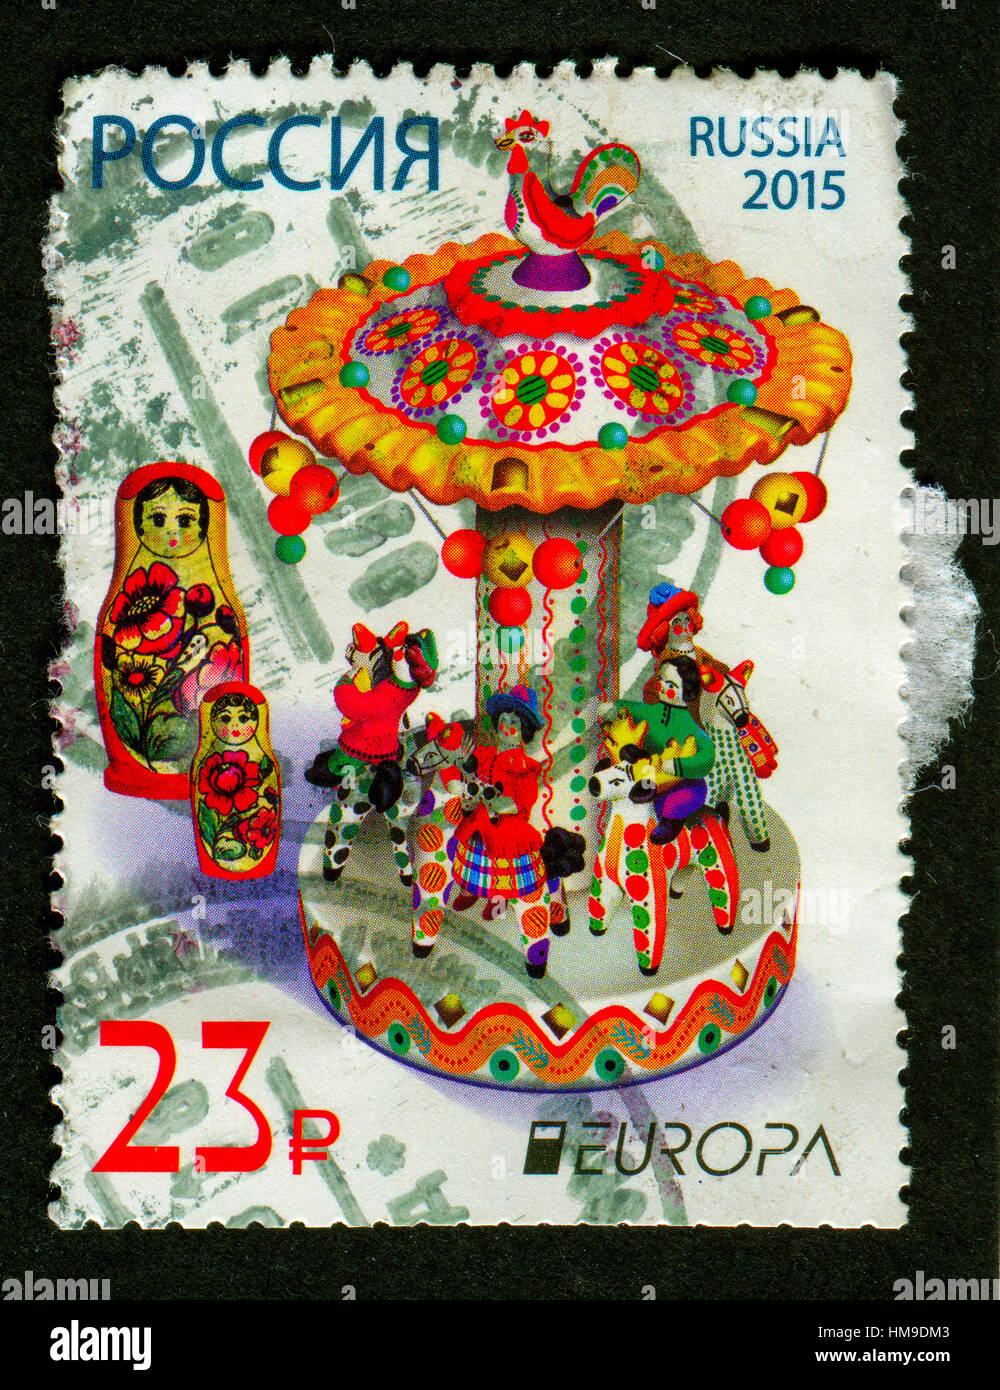 Stamp printed in Russia shows image of the matryoshka doll, also known as a Russian nesting doll, is a set of wooden dolls. Stock Photo